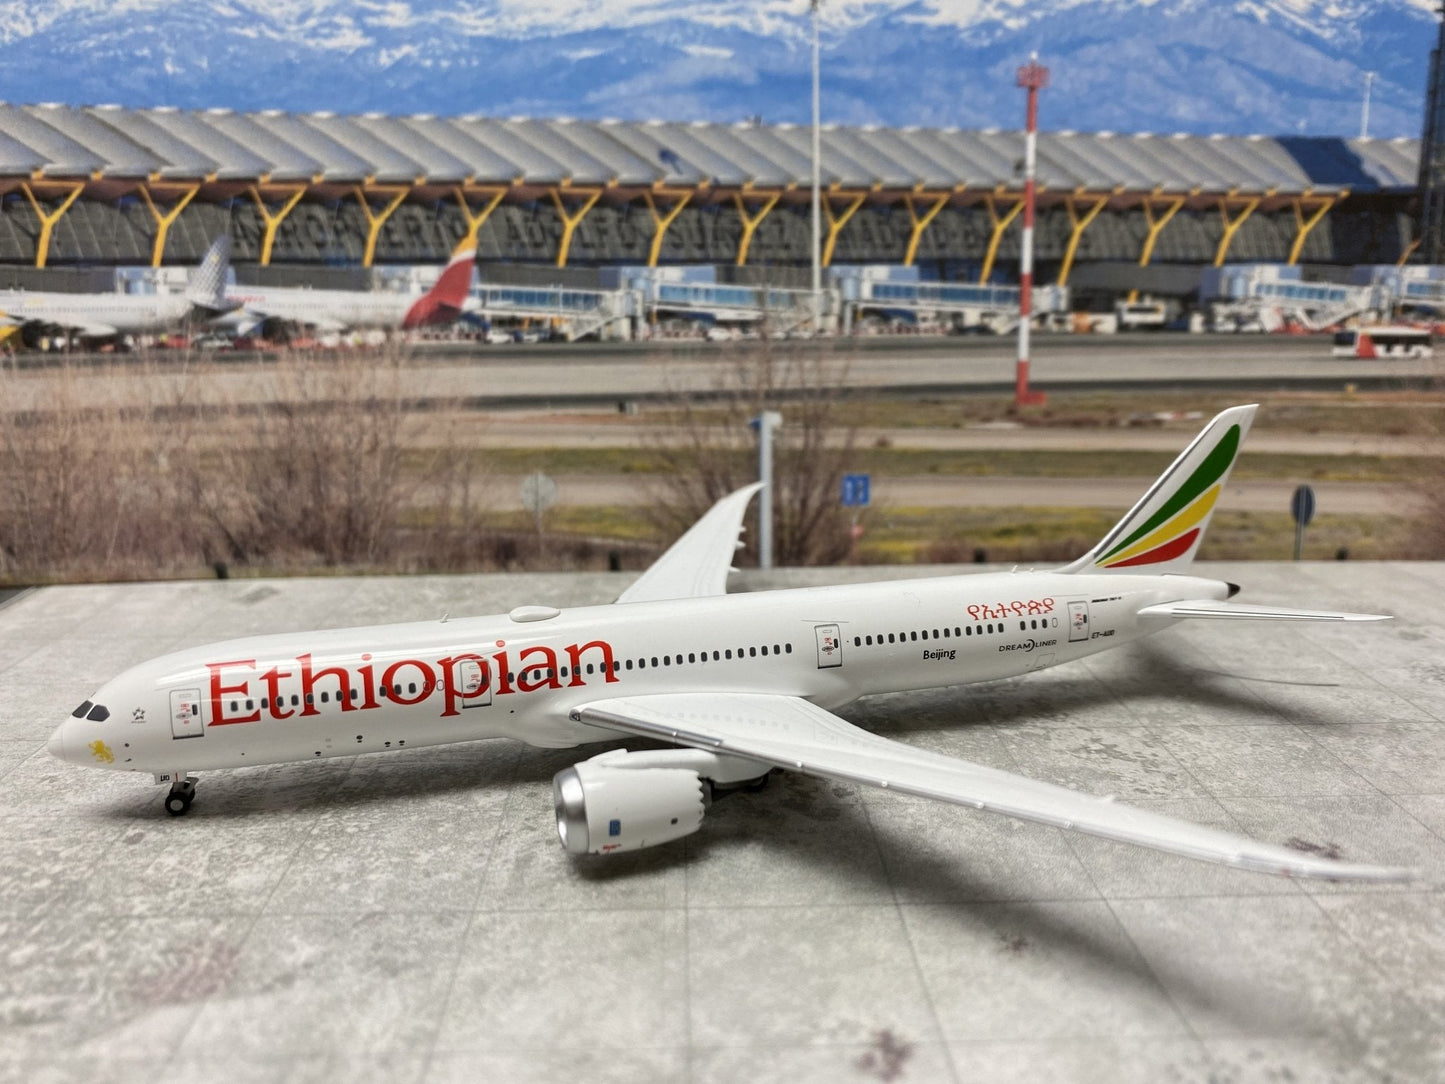 1/400 Ethiopian Airlines B 787-9 "Beijing" NG Models 55061 - Midwest Model Store